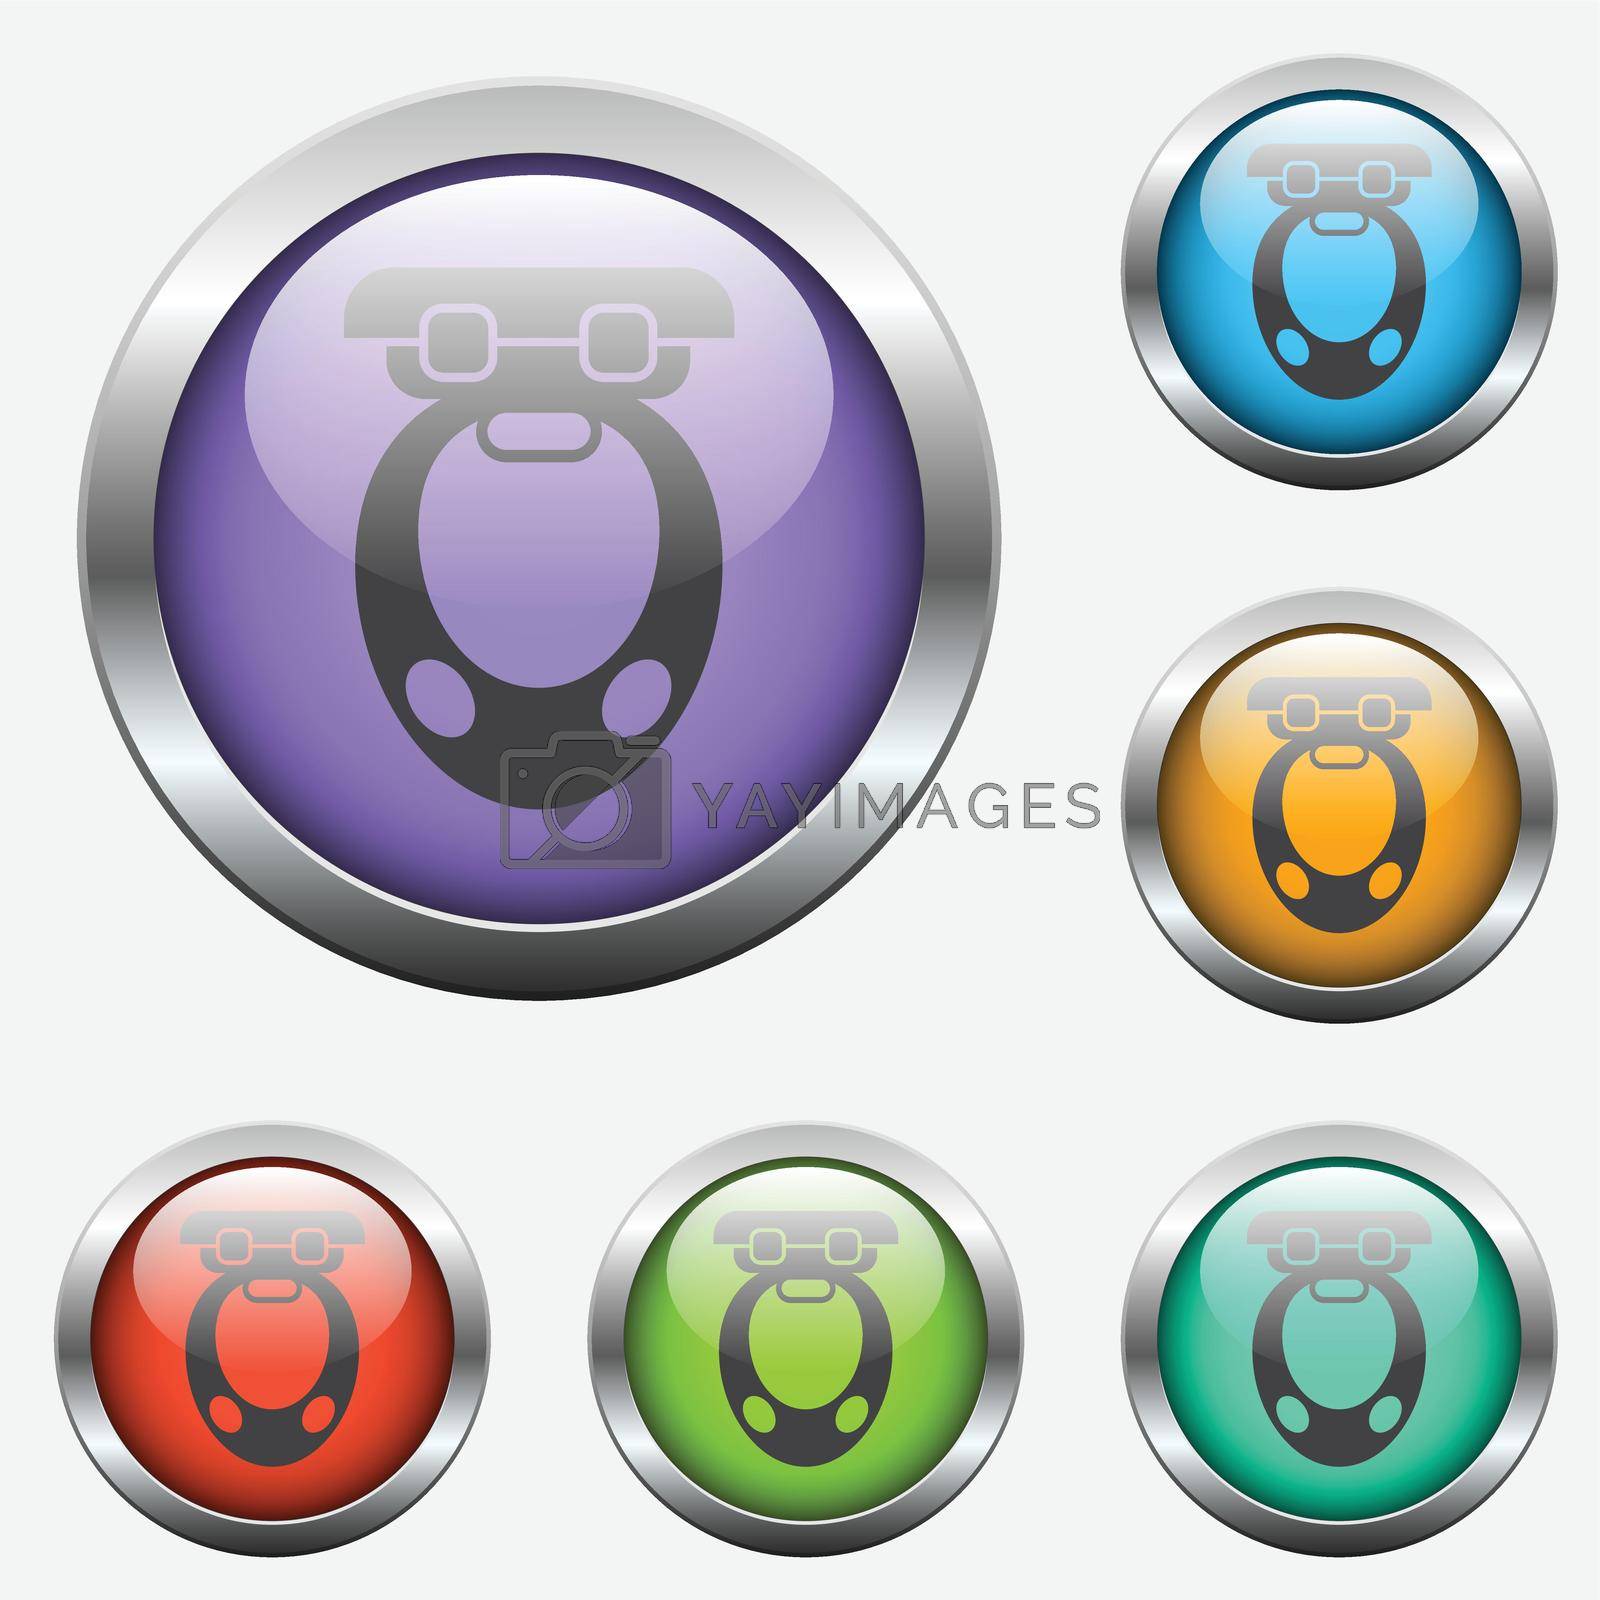 sky train vector icon on color glass buttons